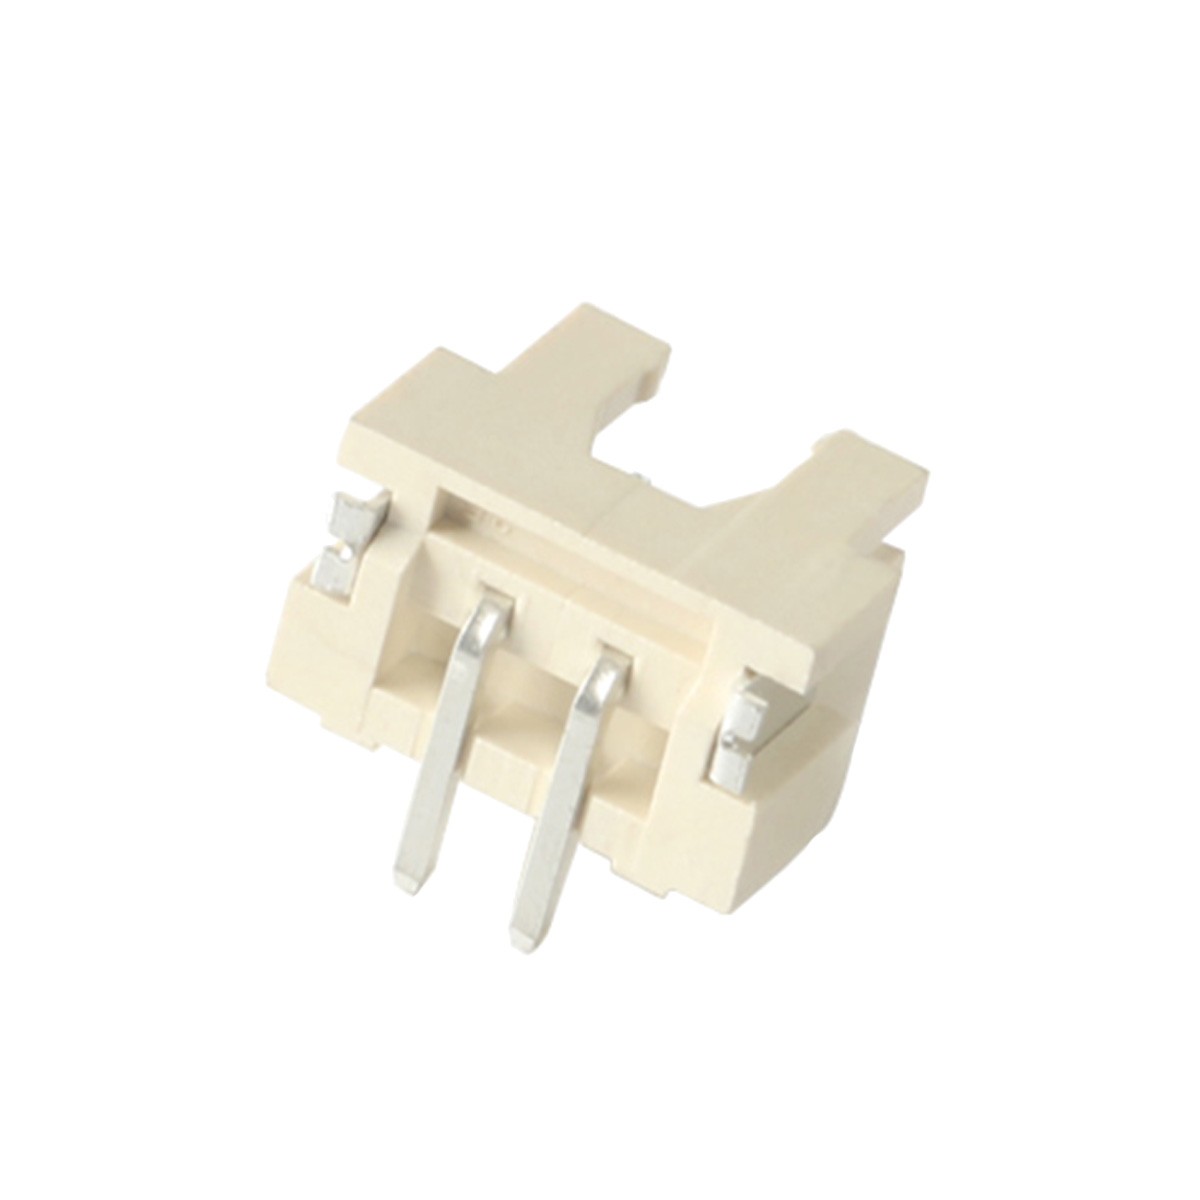 XH 2.54mm Male 2 Pin Angled Socket Connector White (Unit)